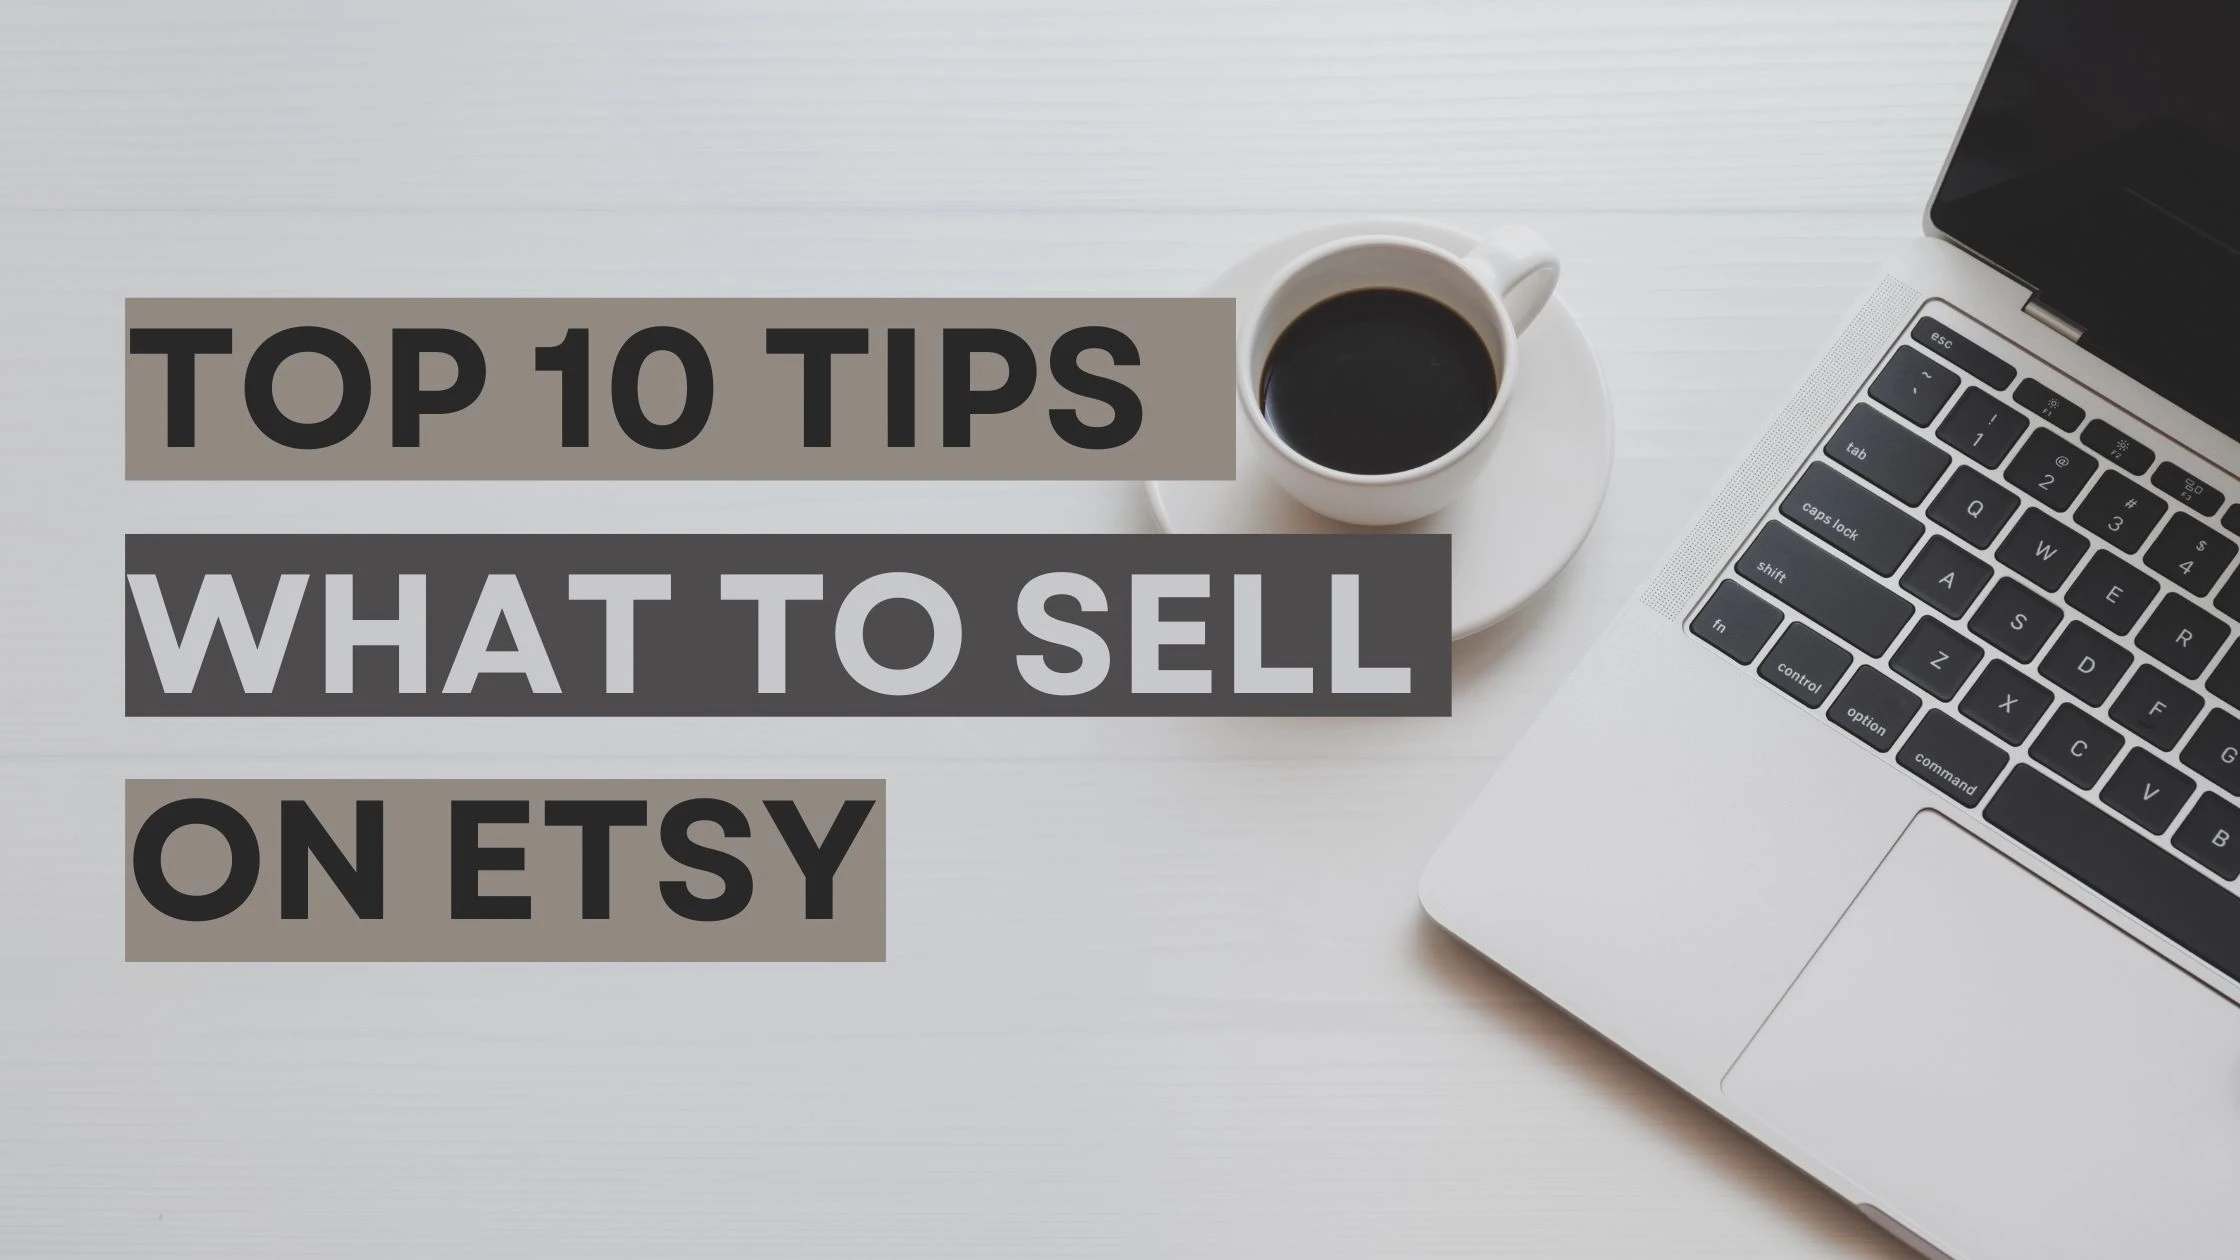 Top 10 Tips for sell things on Etsy